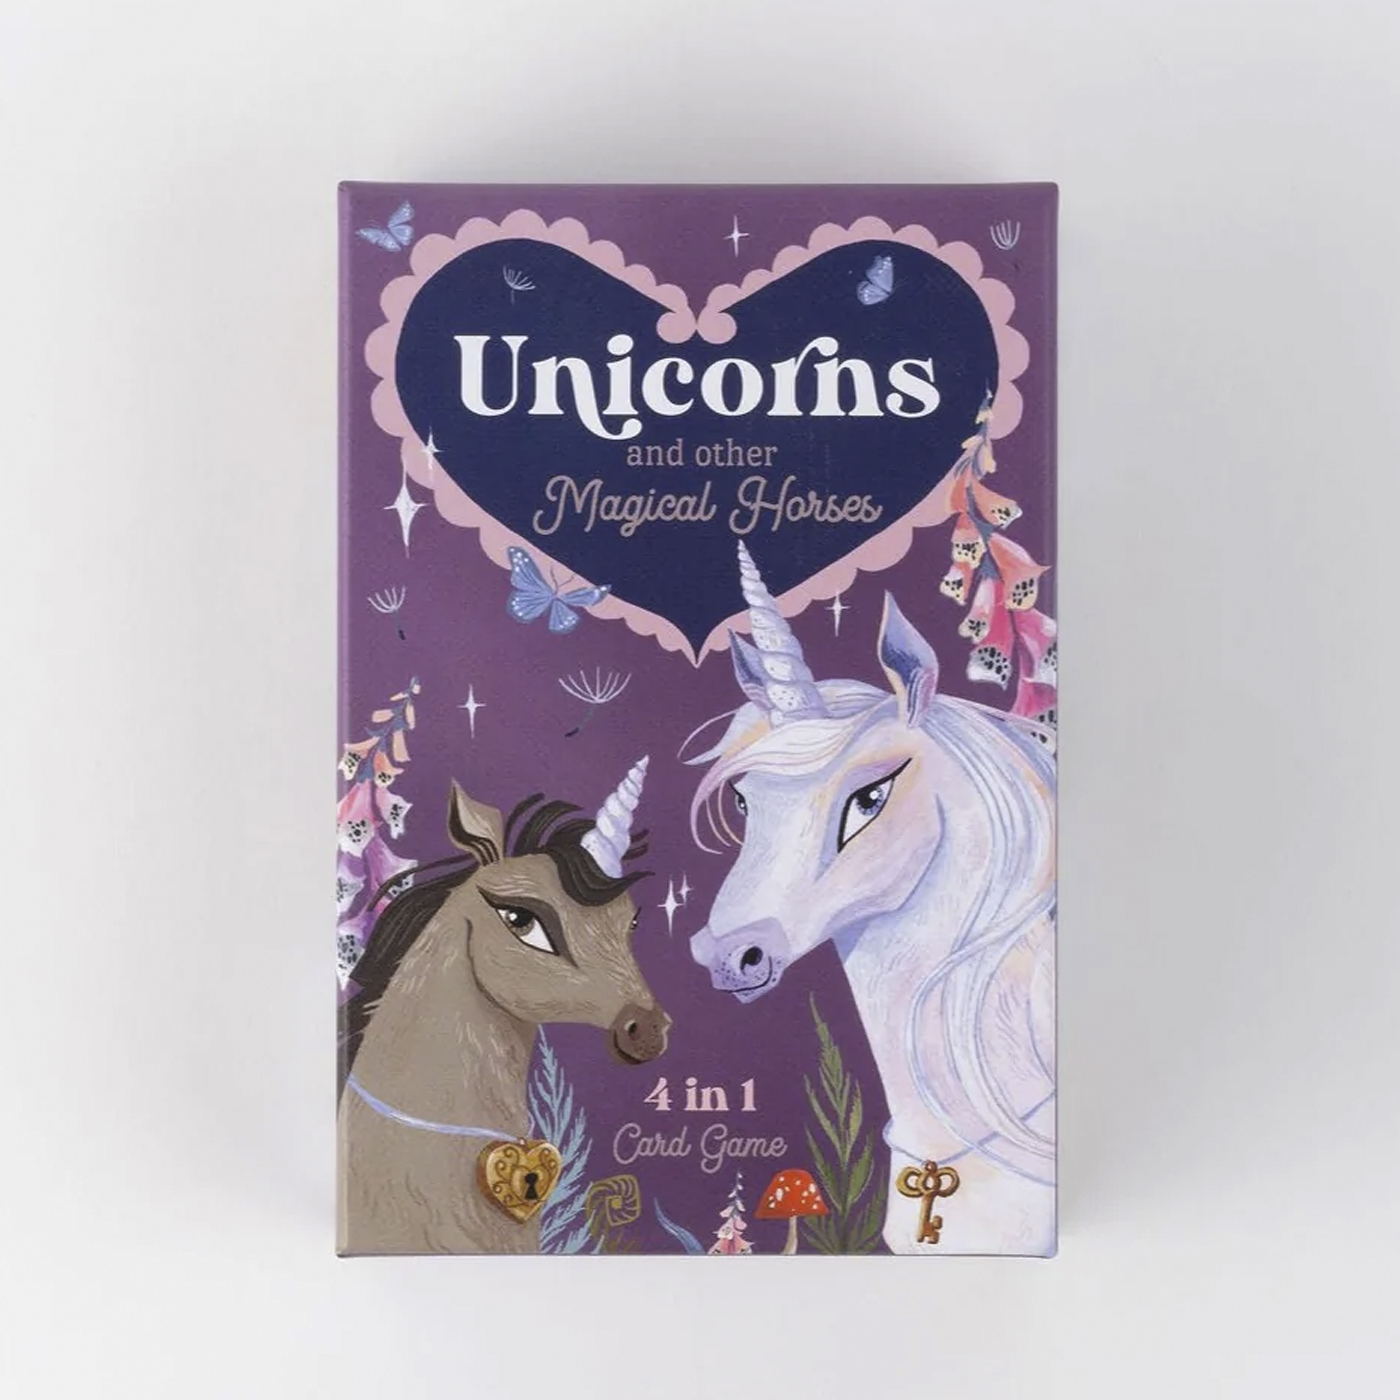  Unicorns & Other Magical Horses: 4 In 1 Card Game